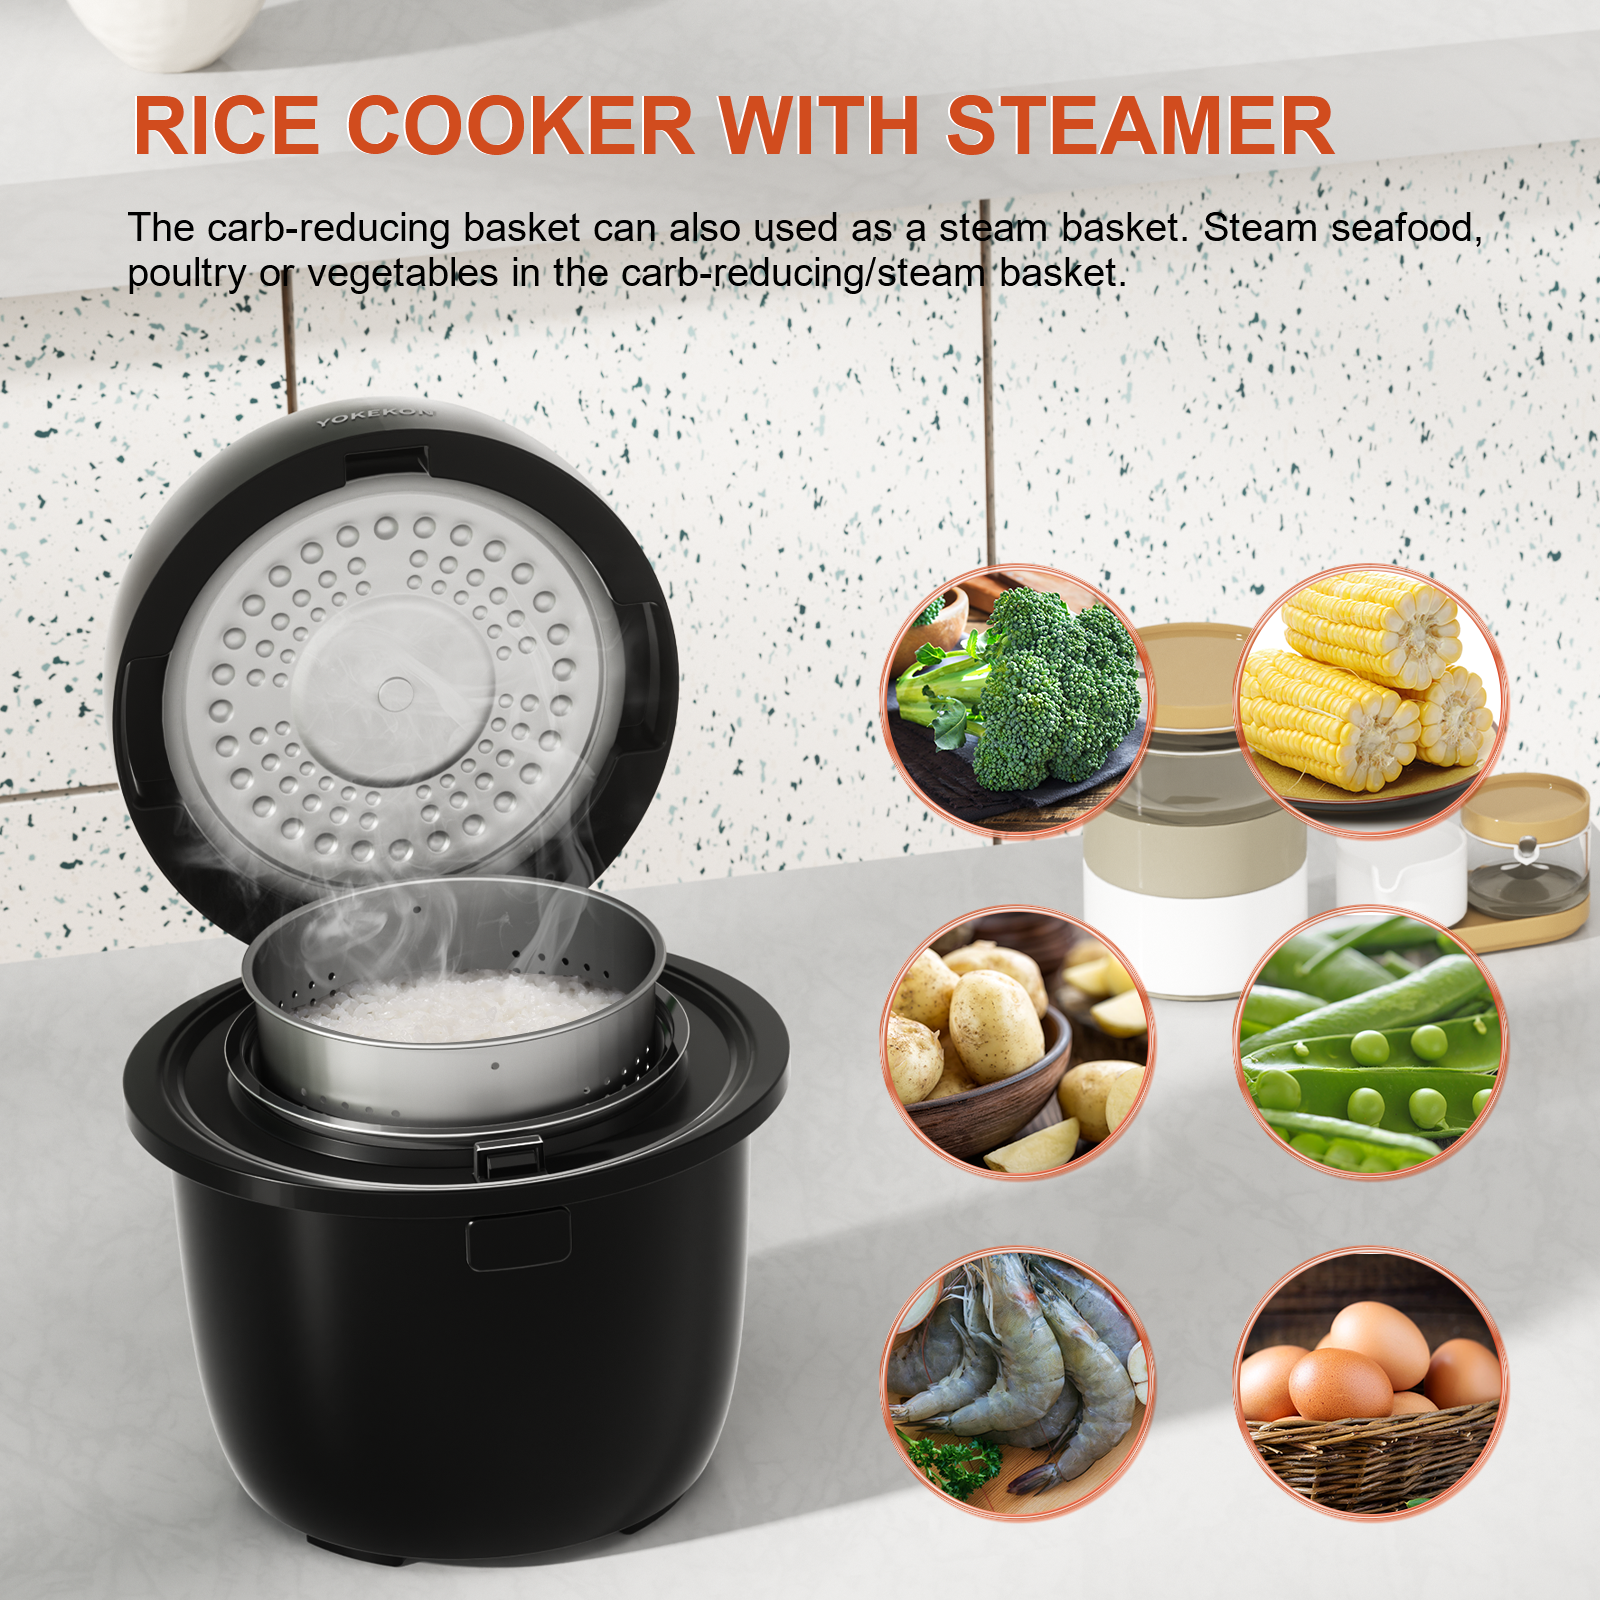 Rice Cooker Small Low Carb, YOKEKON 6-cup (cooked) Rice Cooker with Stainless Steel Steamer, 8-in-1 Rice Maker, Delay Timer and Auto Keep Warm Feature, Sushi, Risitto, Steamer, Cake, Black